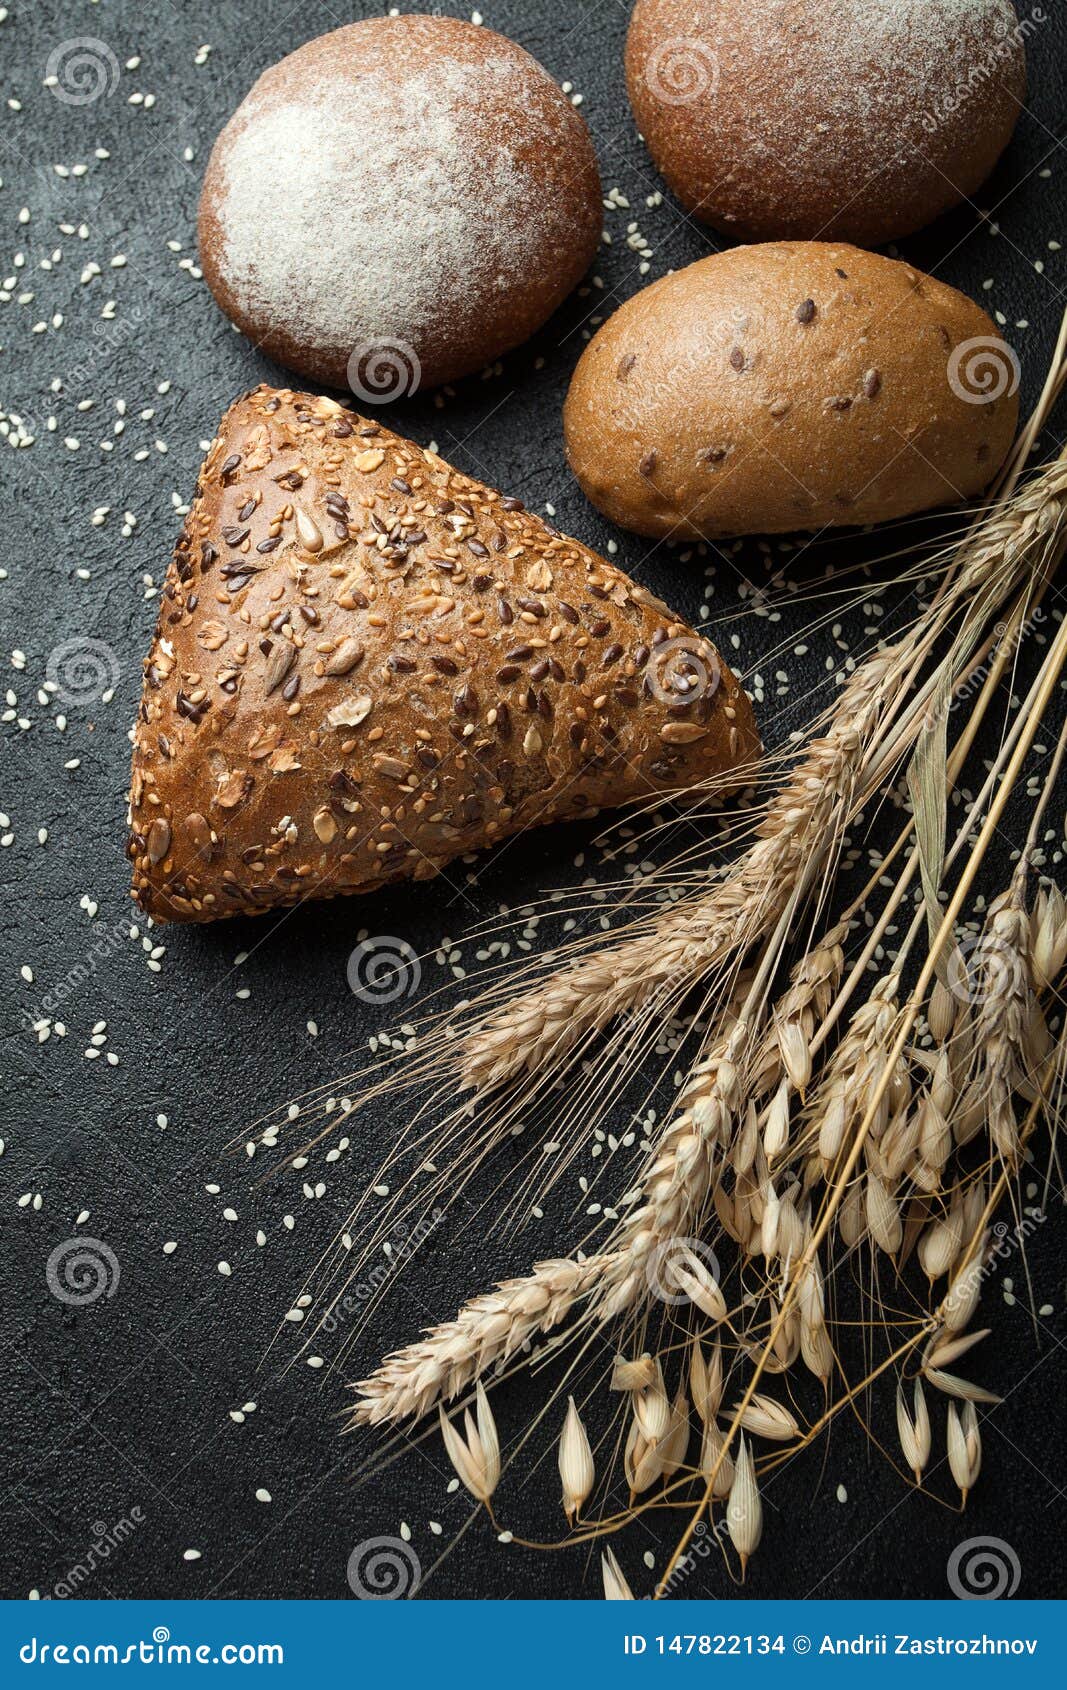 Homemade Different Types Of Bread On A Rustic Dark Background Stock